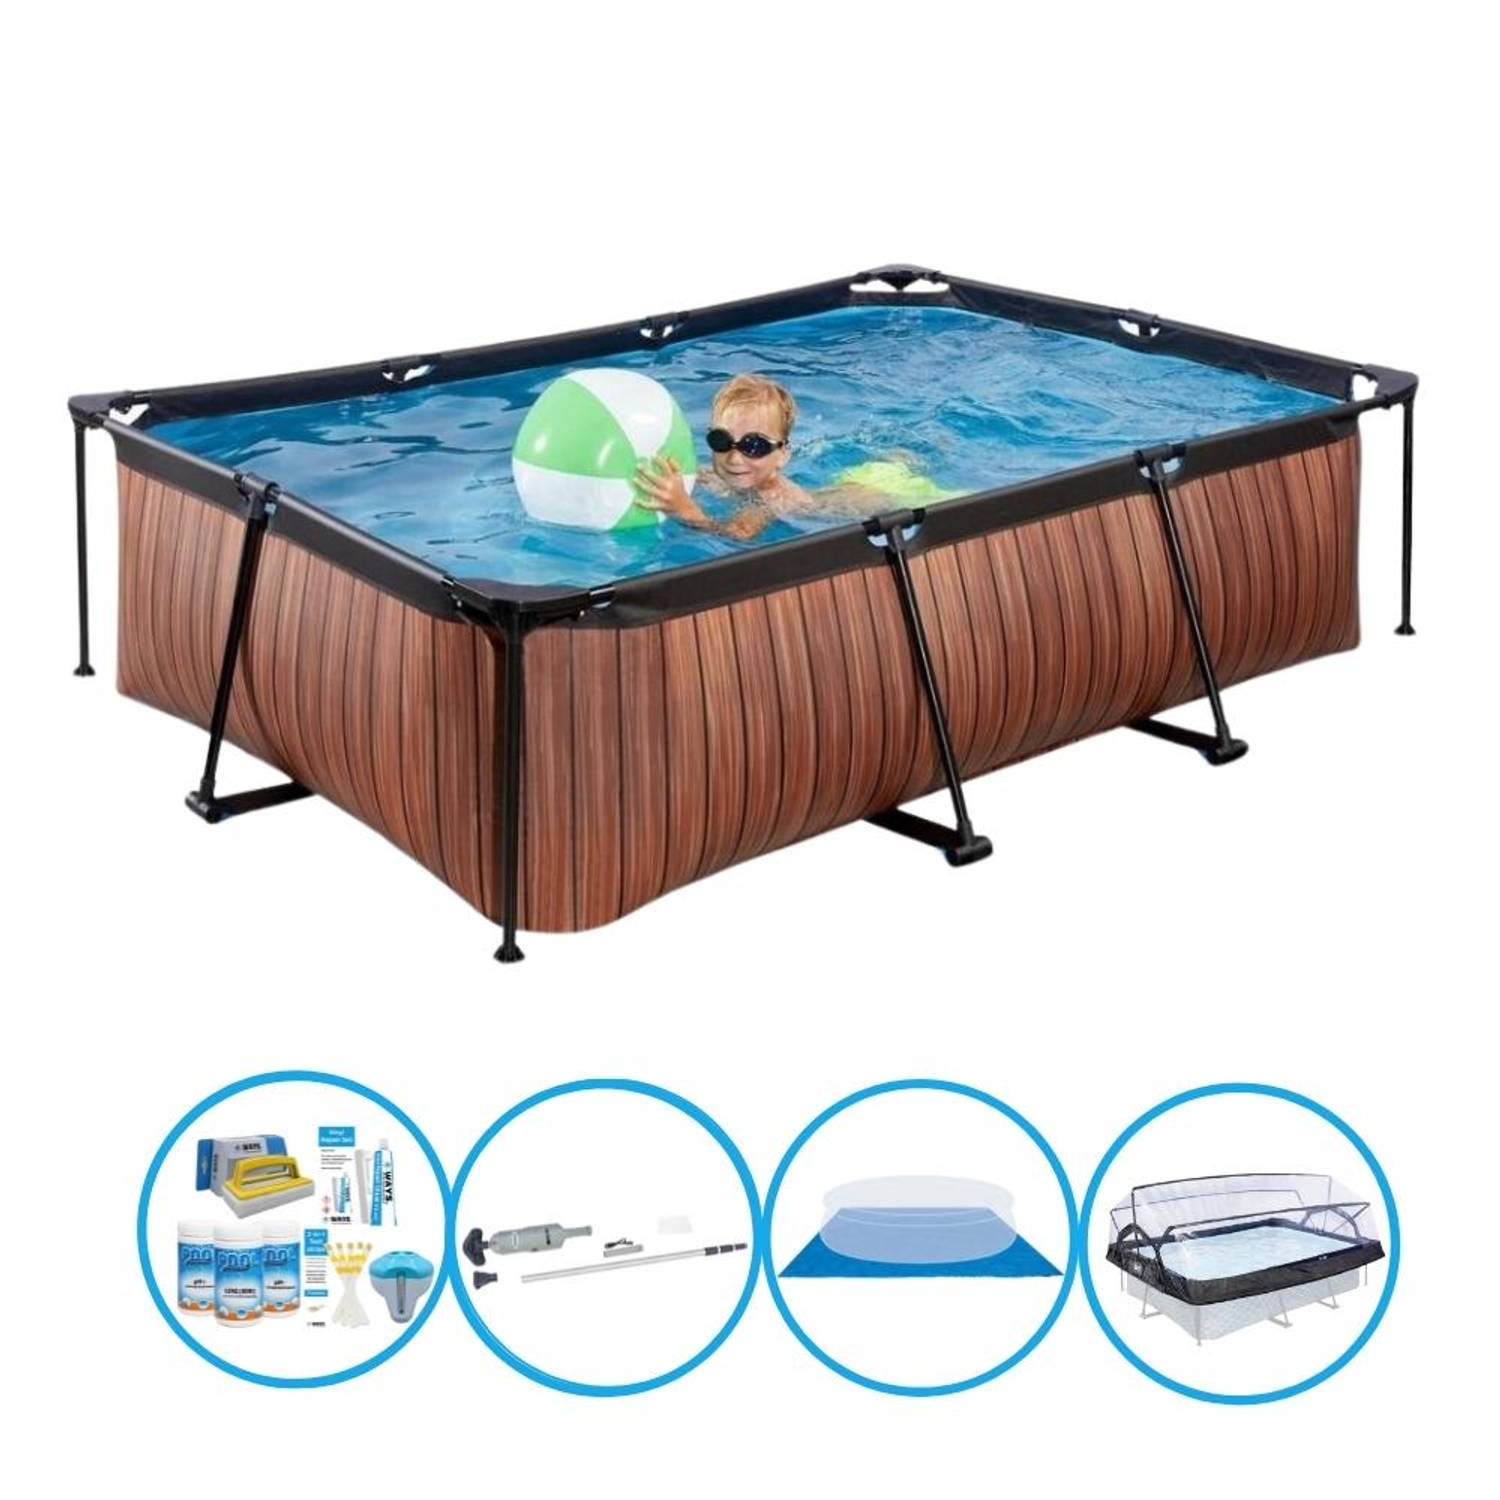 EXIT Zwembad Timber Style - 220x150x60 cm - Frame Pool - Complete zwembadset